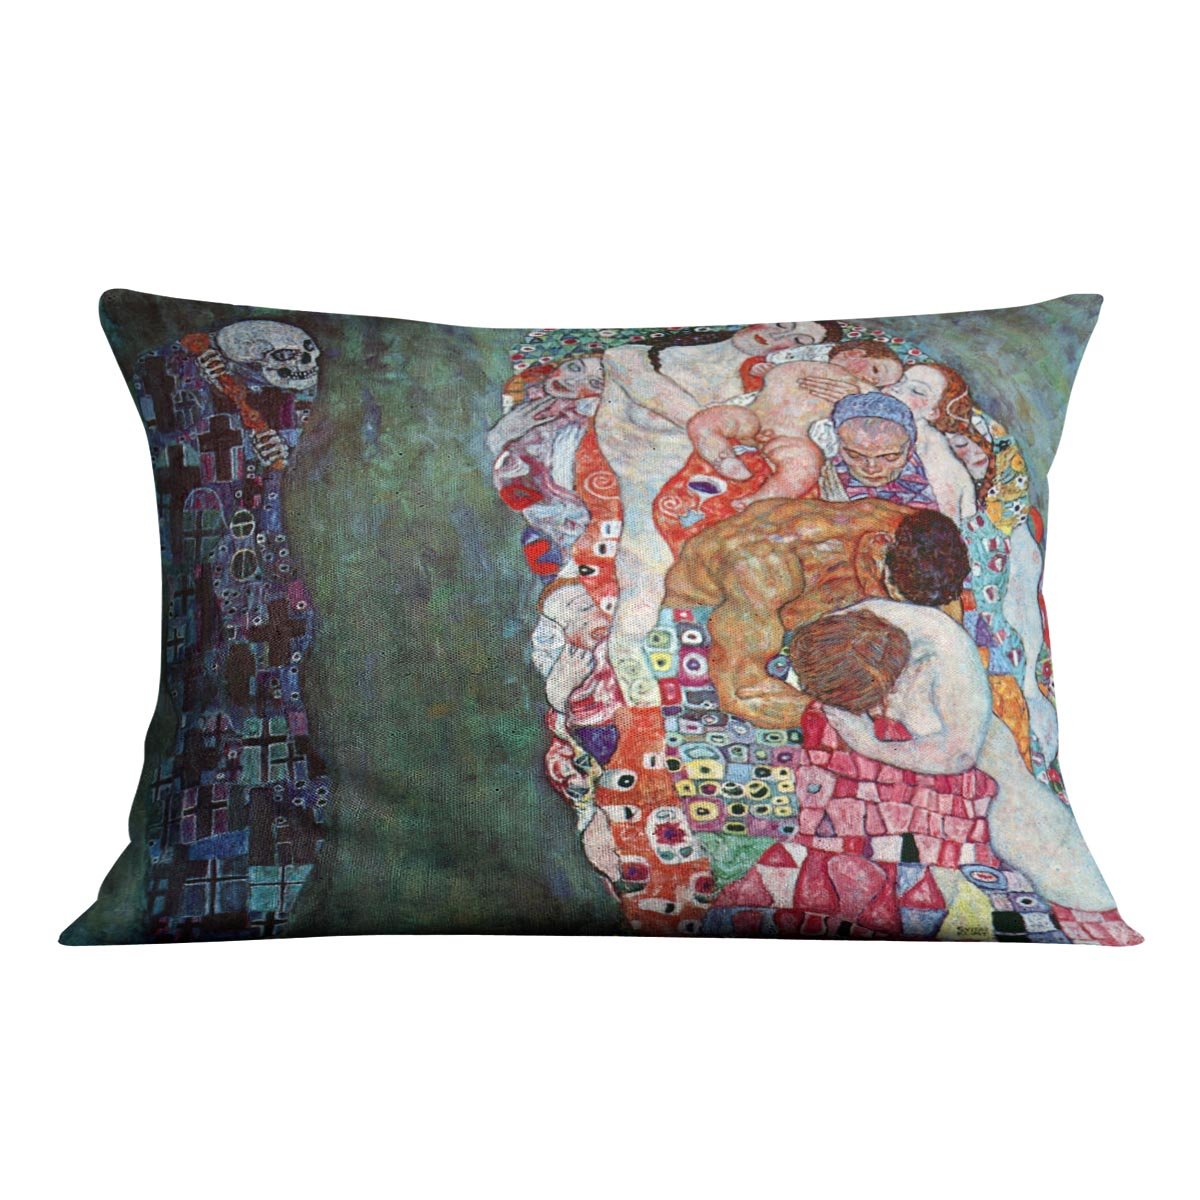 Death and Life by Klimt Throw Pillow